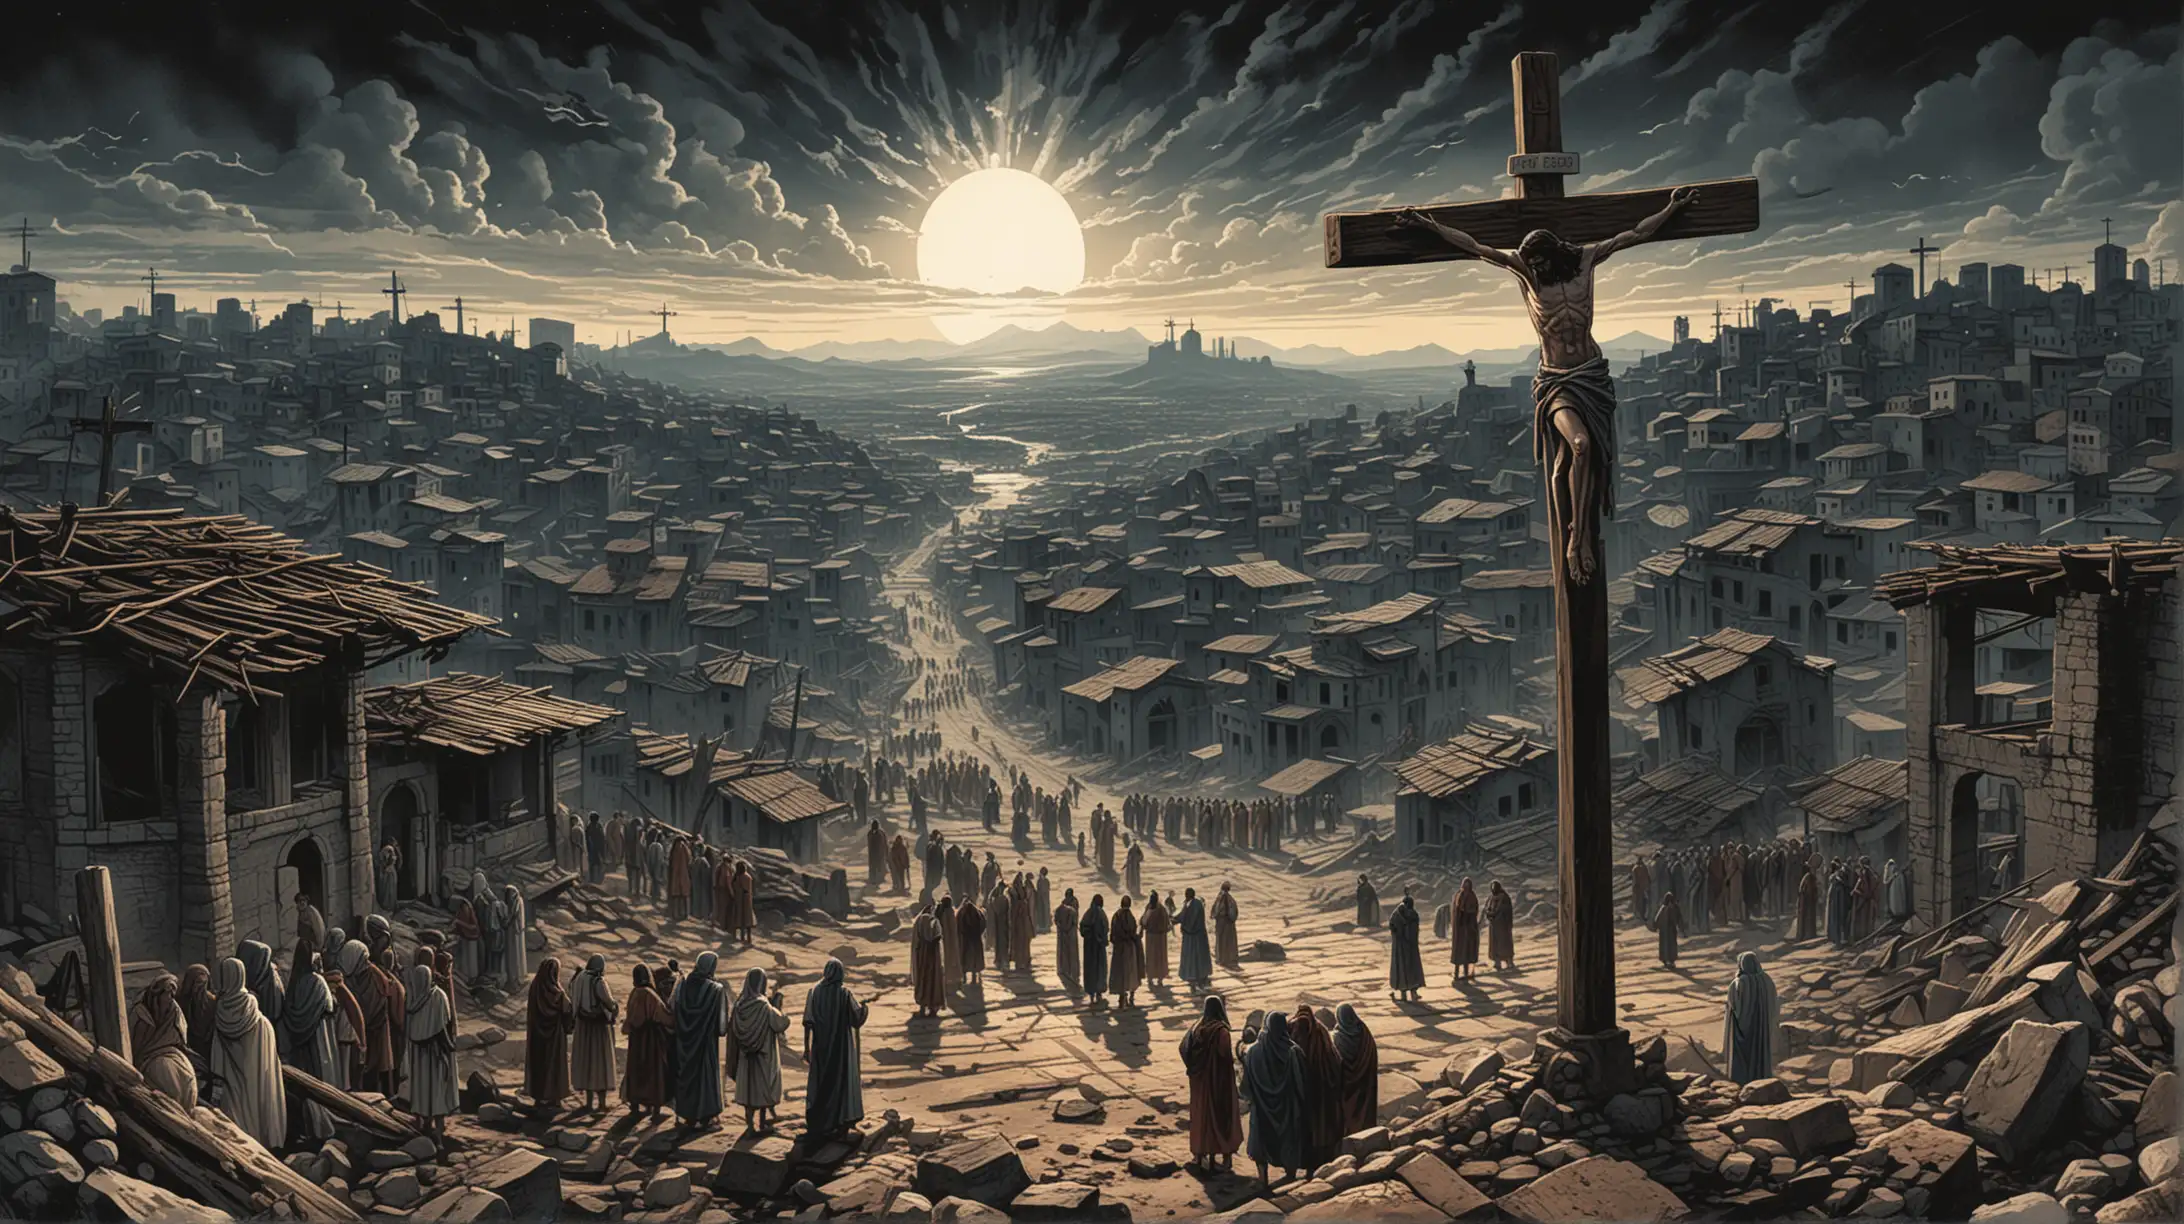 A graphic novel page featuring the dramatic imagery of the earthquake and darkness, interspersed with excerpts from the scriptures foretelling these events, highlighting the supernatural elements surrounding Jesus' crucifixion.